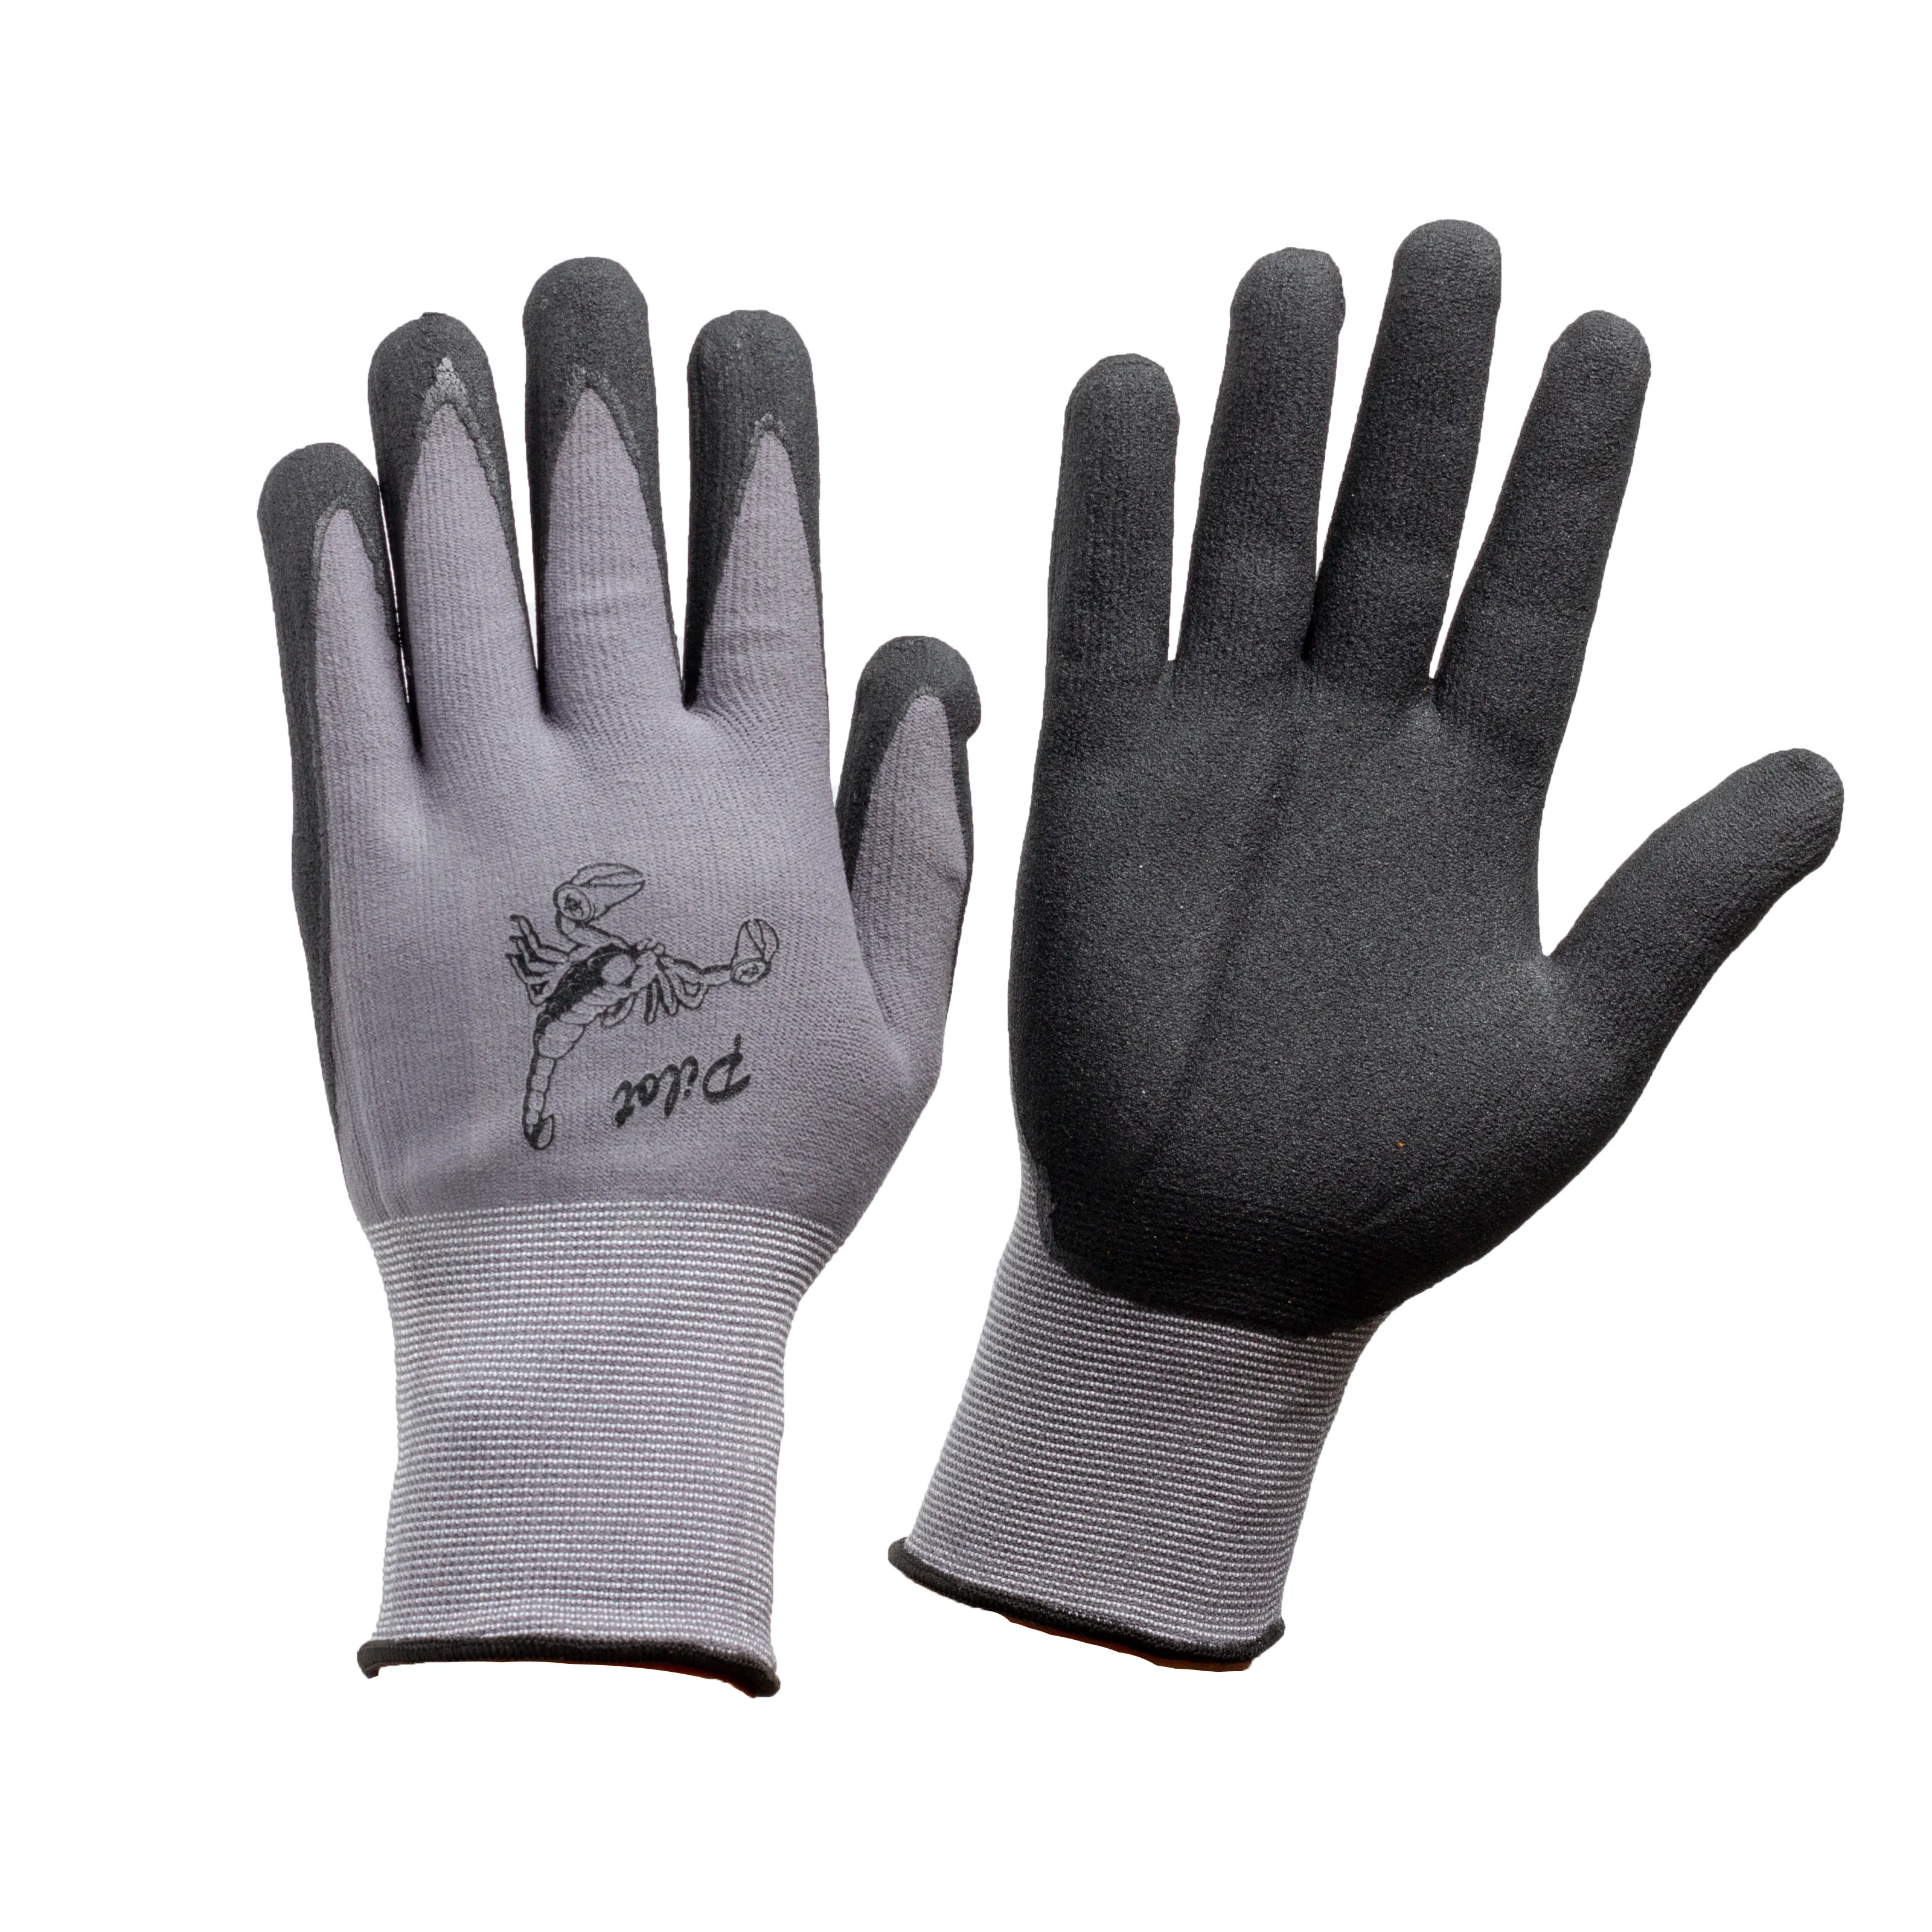 Polyester seamless knitted black sandy nitrile half coated work glove